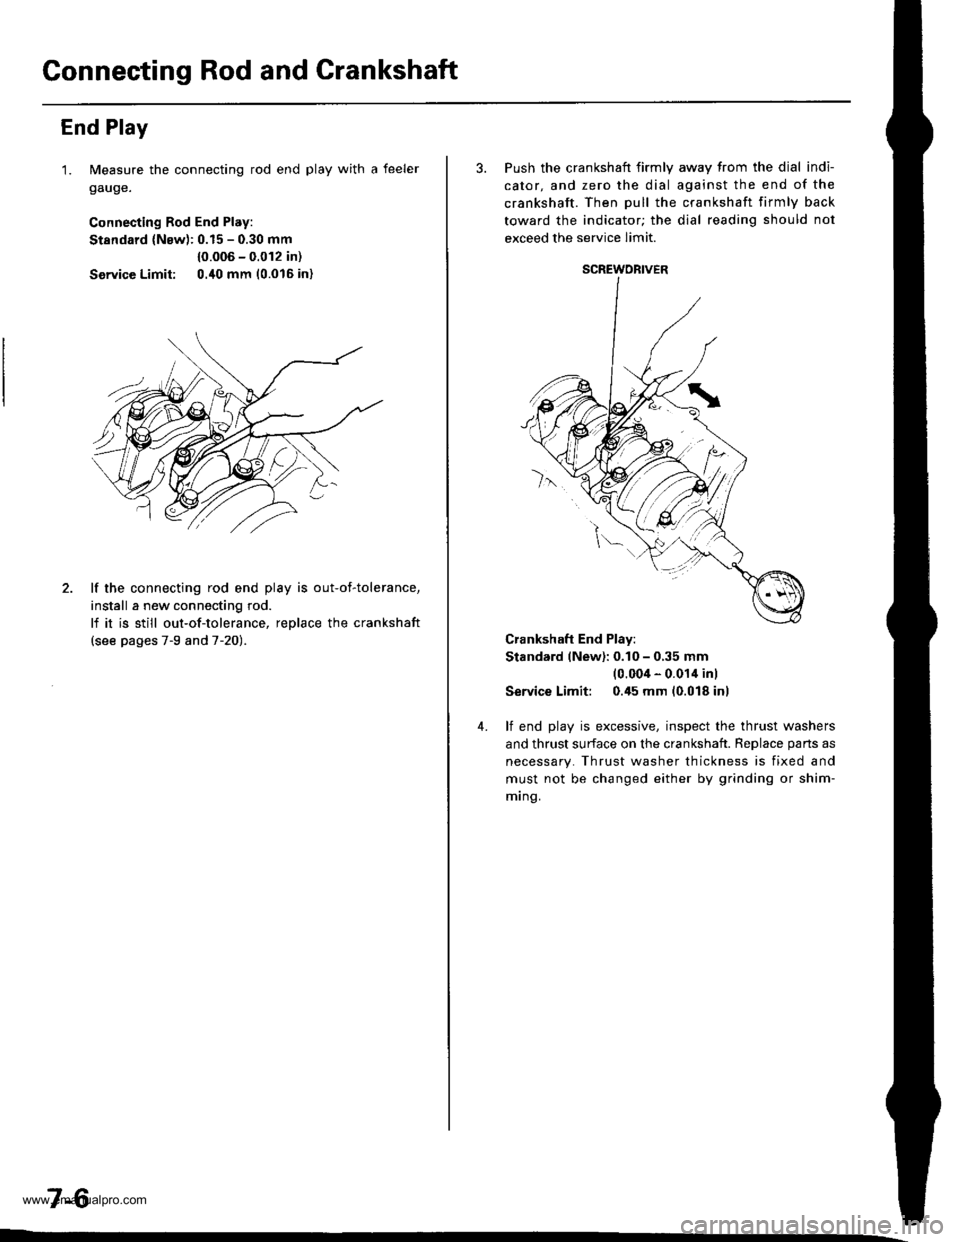 HONDA CR-V 1997 RD1-RD3 / 1.G User Guide 
Connecting Rod and Crankshaft
End Play
1. Measure the connecting rod end play with a feeler
gauge.
Connecting Rod End Play:
Stsndard (Nsw): 0.15 - 0.30 mm
{0.006 - 0.012 in)
Service Limit: 0./t0 mm 1